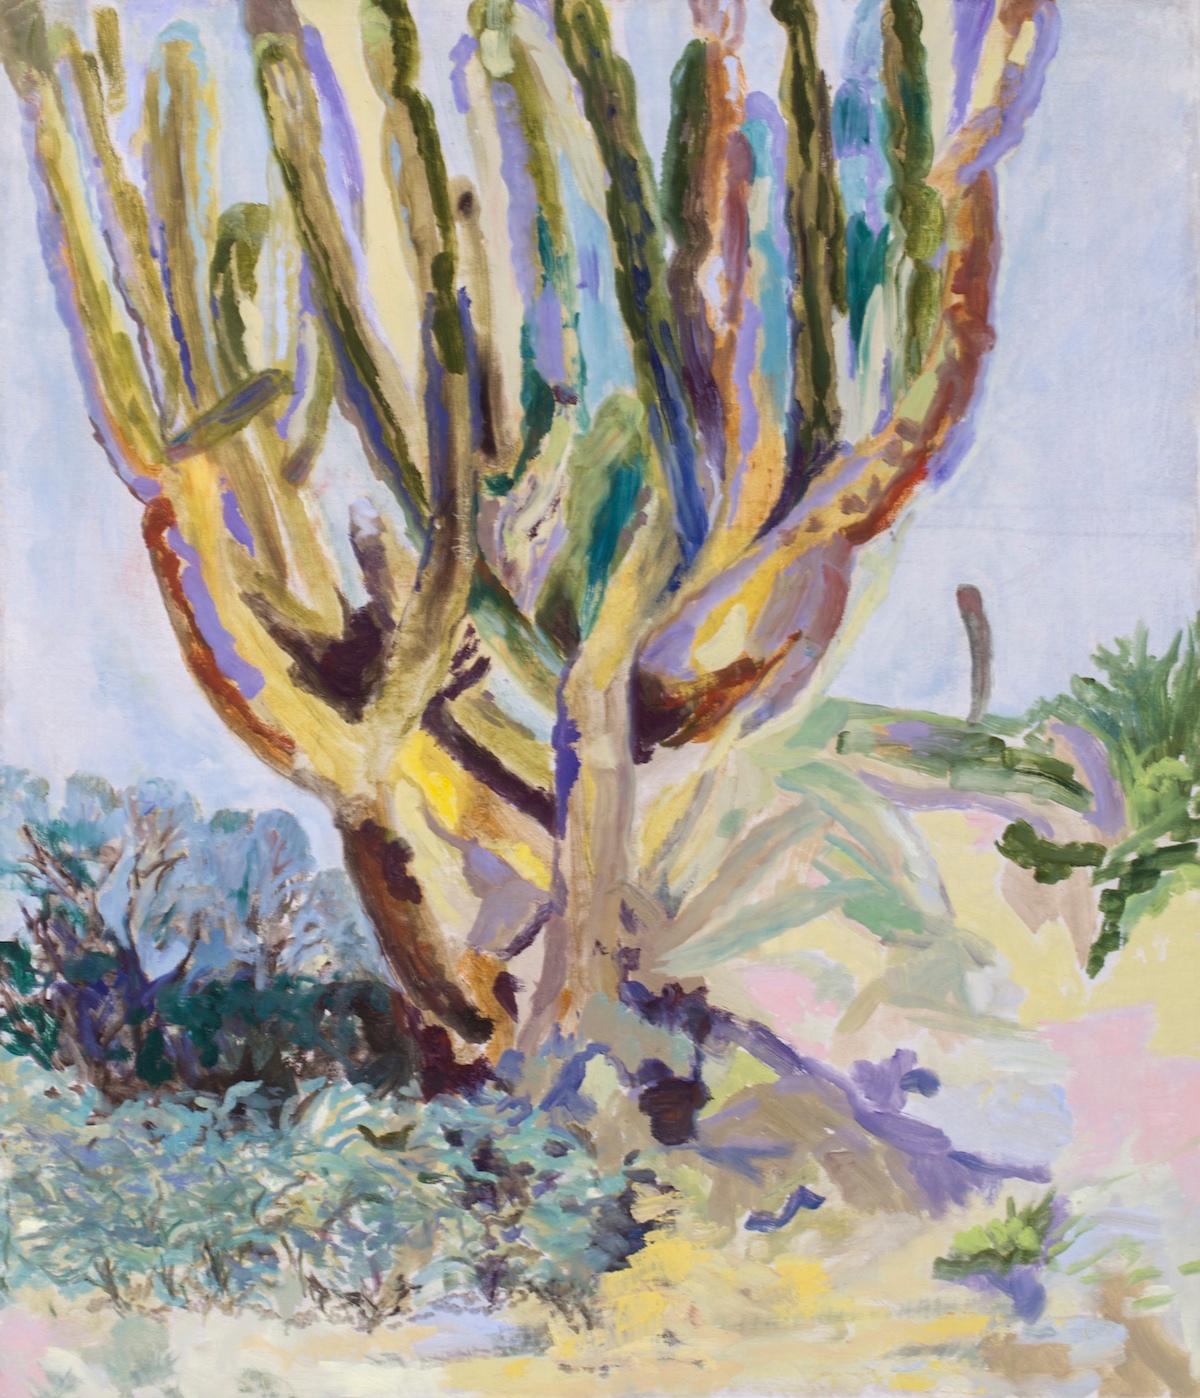 Gianne de Genevraye Abstract Painting - Contemporary Desert Landscape Cactus Oil painting sage, yellow light blue